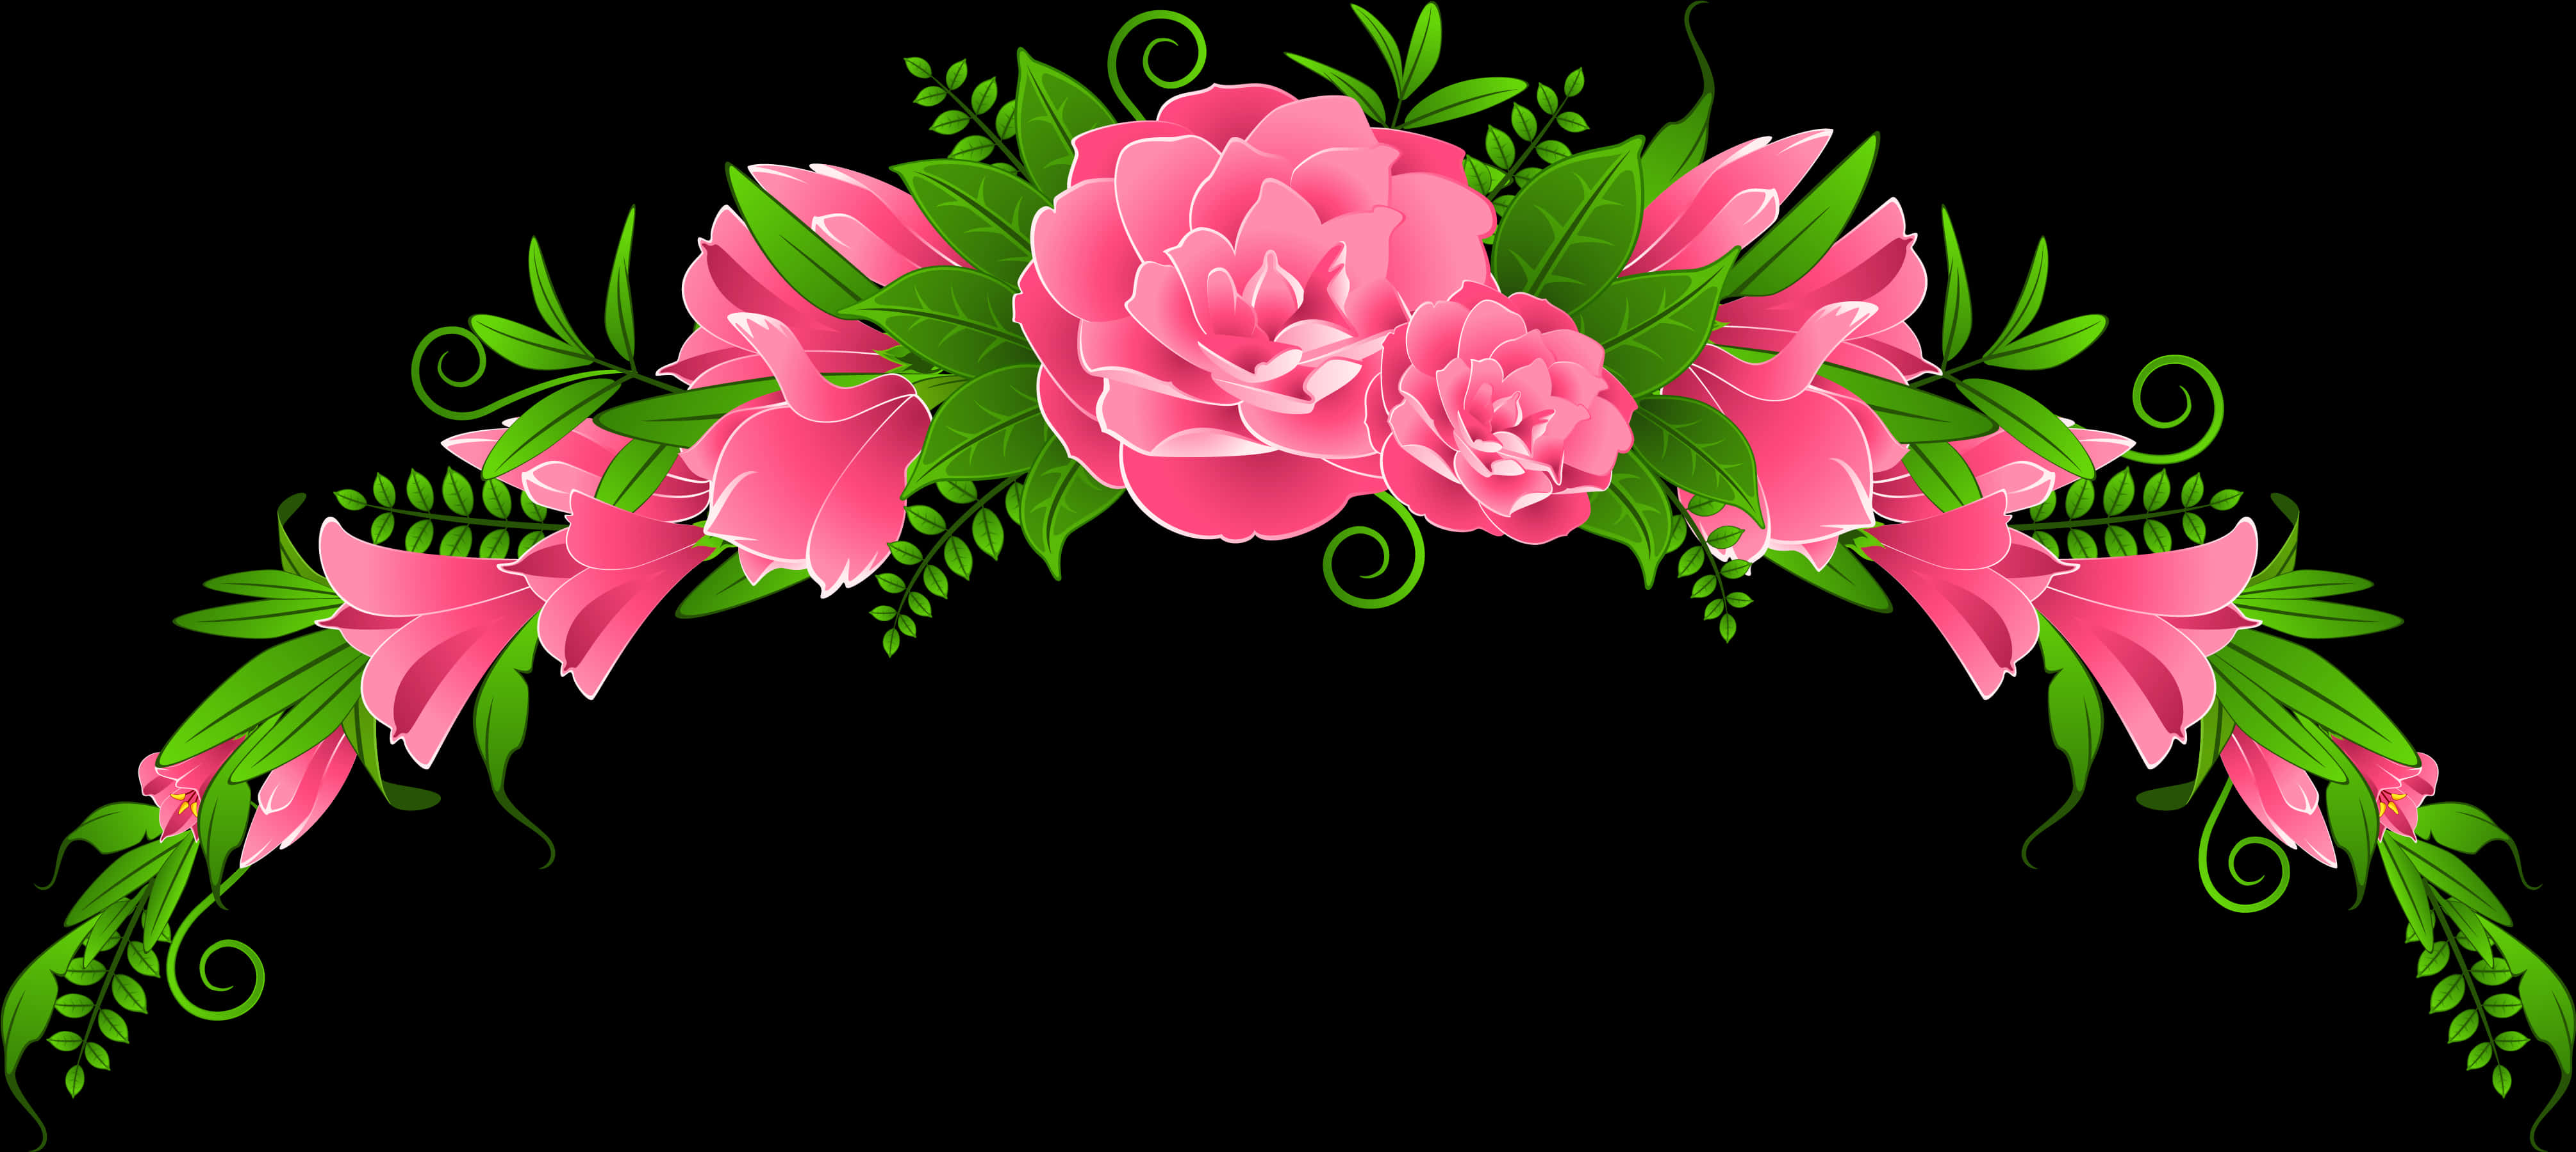 28 Collection Of Pink Flowers Borders Clipart - Border Flowers Png, Transparent Png